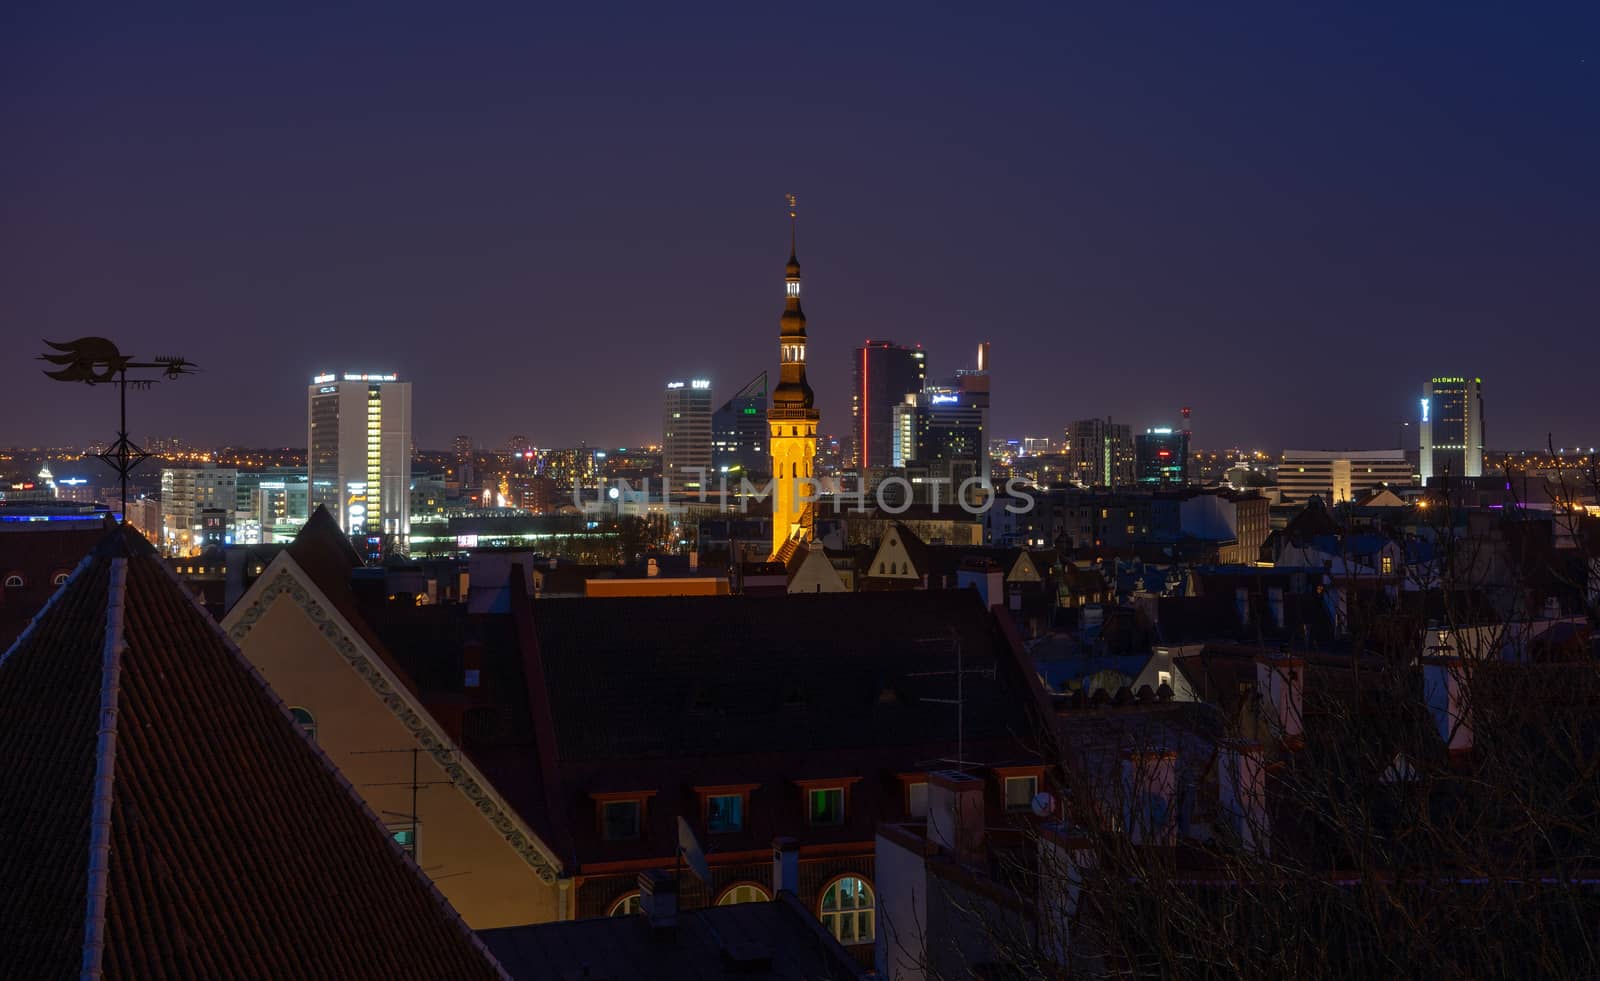 21 April 2018 Tallinn, Estonia. View of the Old town from the observation deck at night